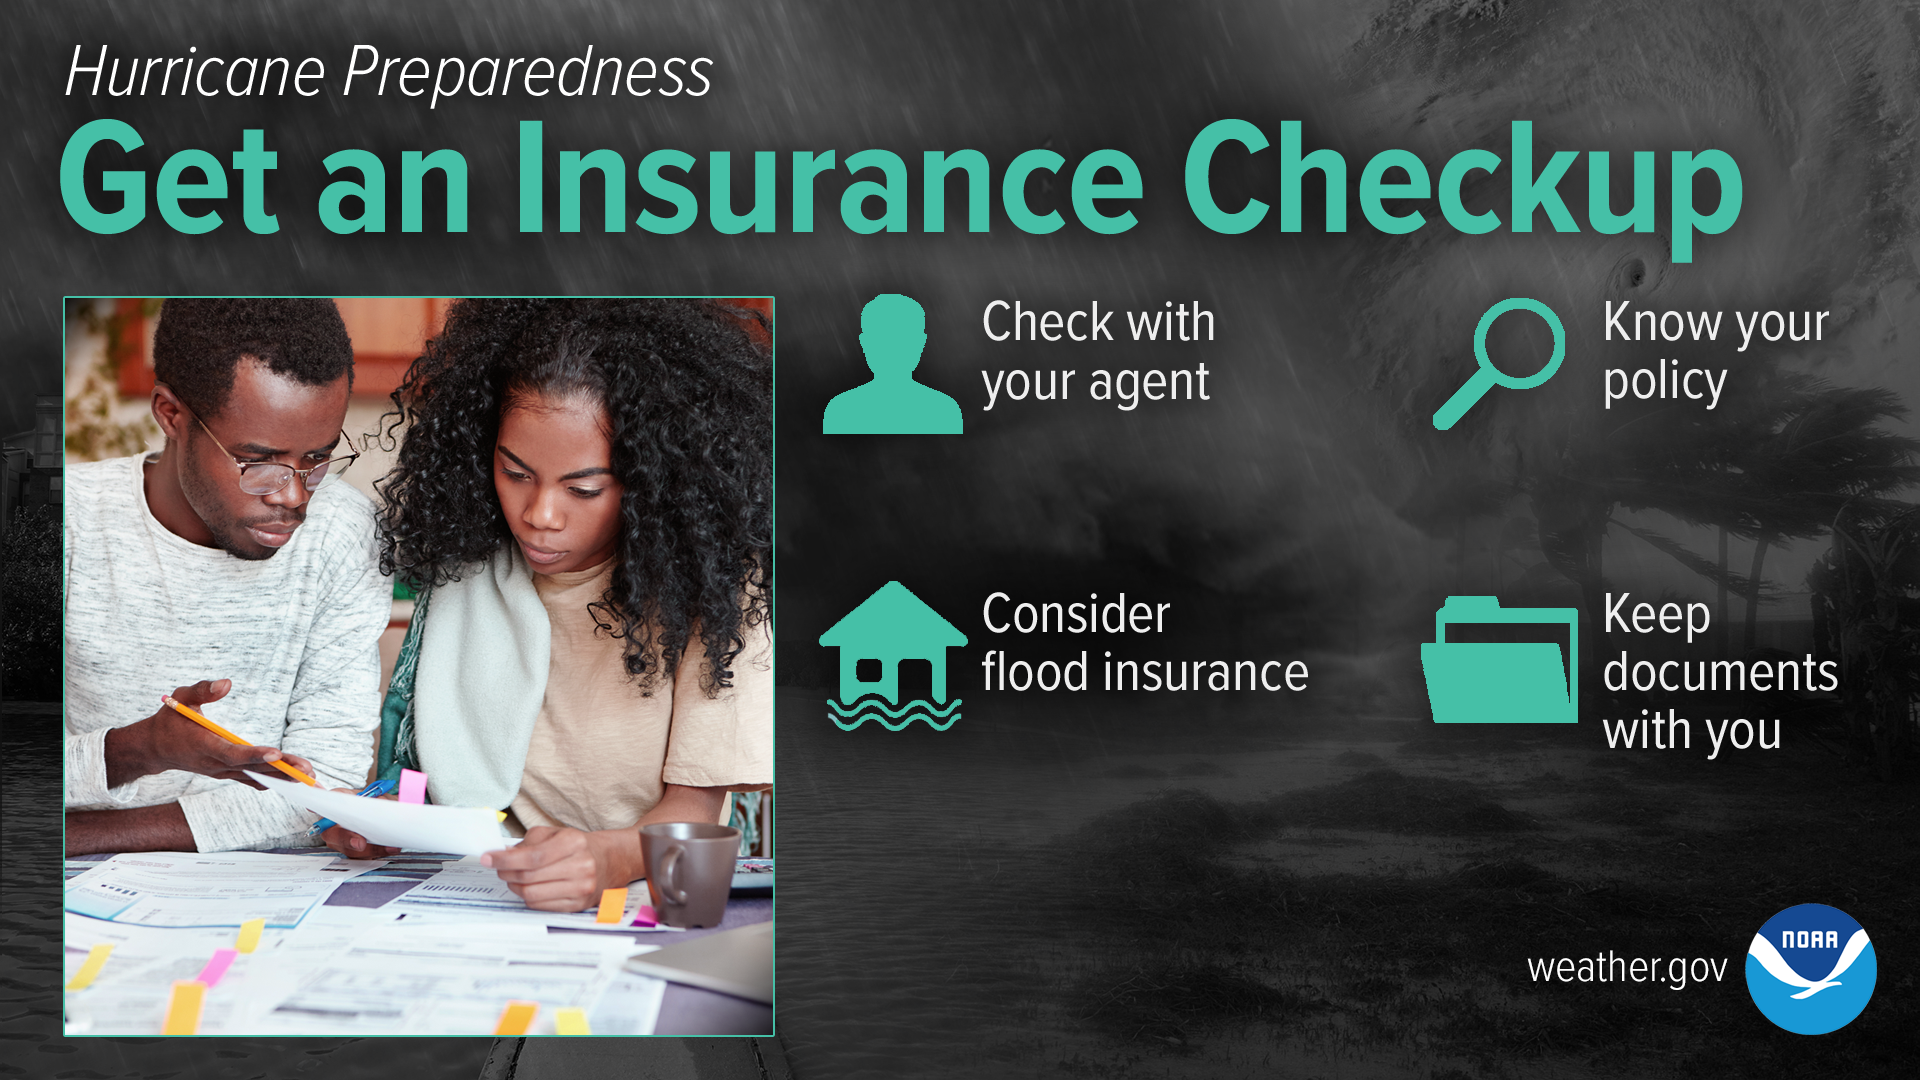 Get an Insurance Checkup (Hurricane Preparedness) | National Oceanic and  Atmospheric Administration